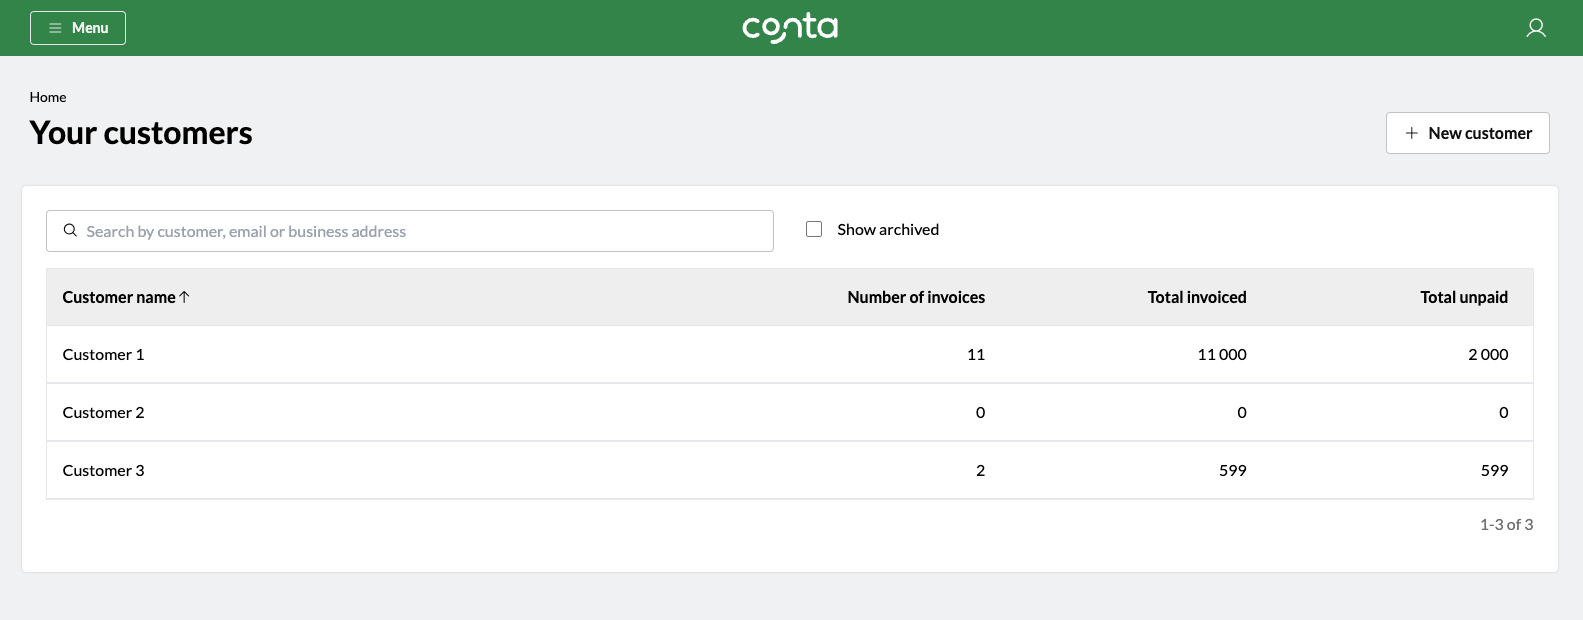 The customer register in Conta, showing all your customers and their information